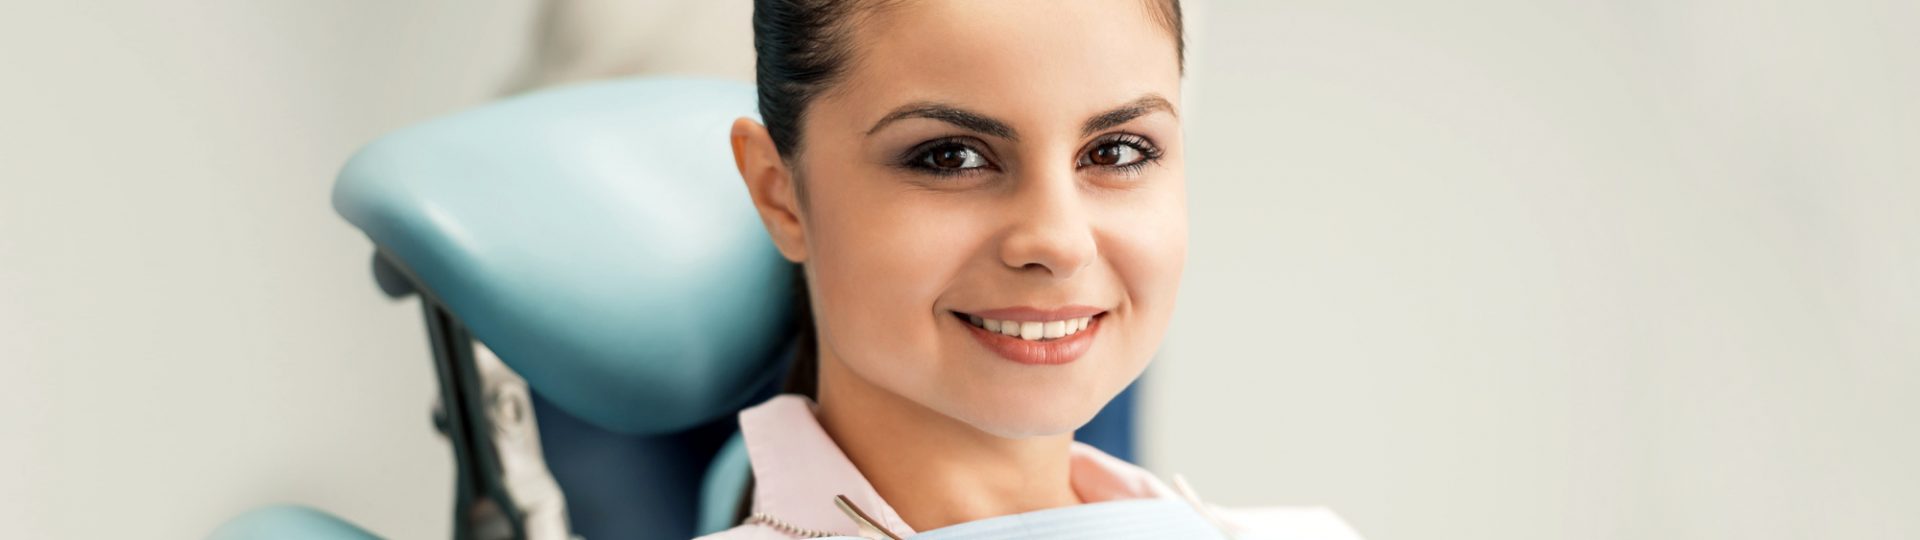 Signs you may need a root canal